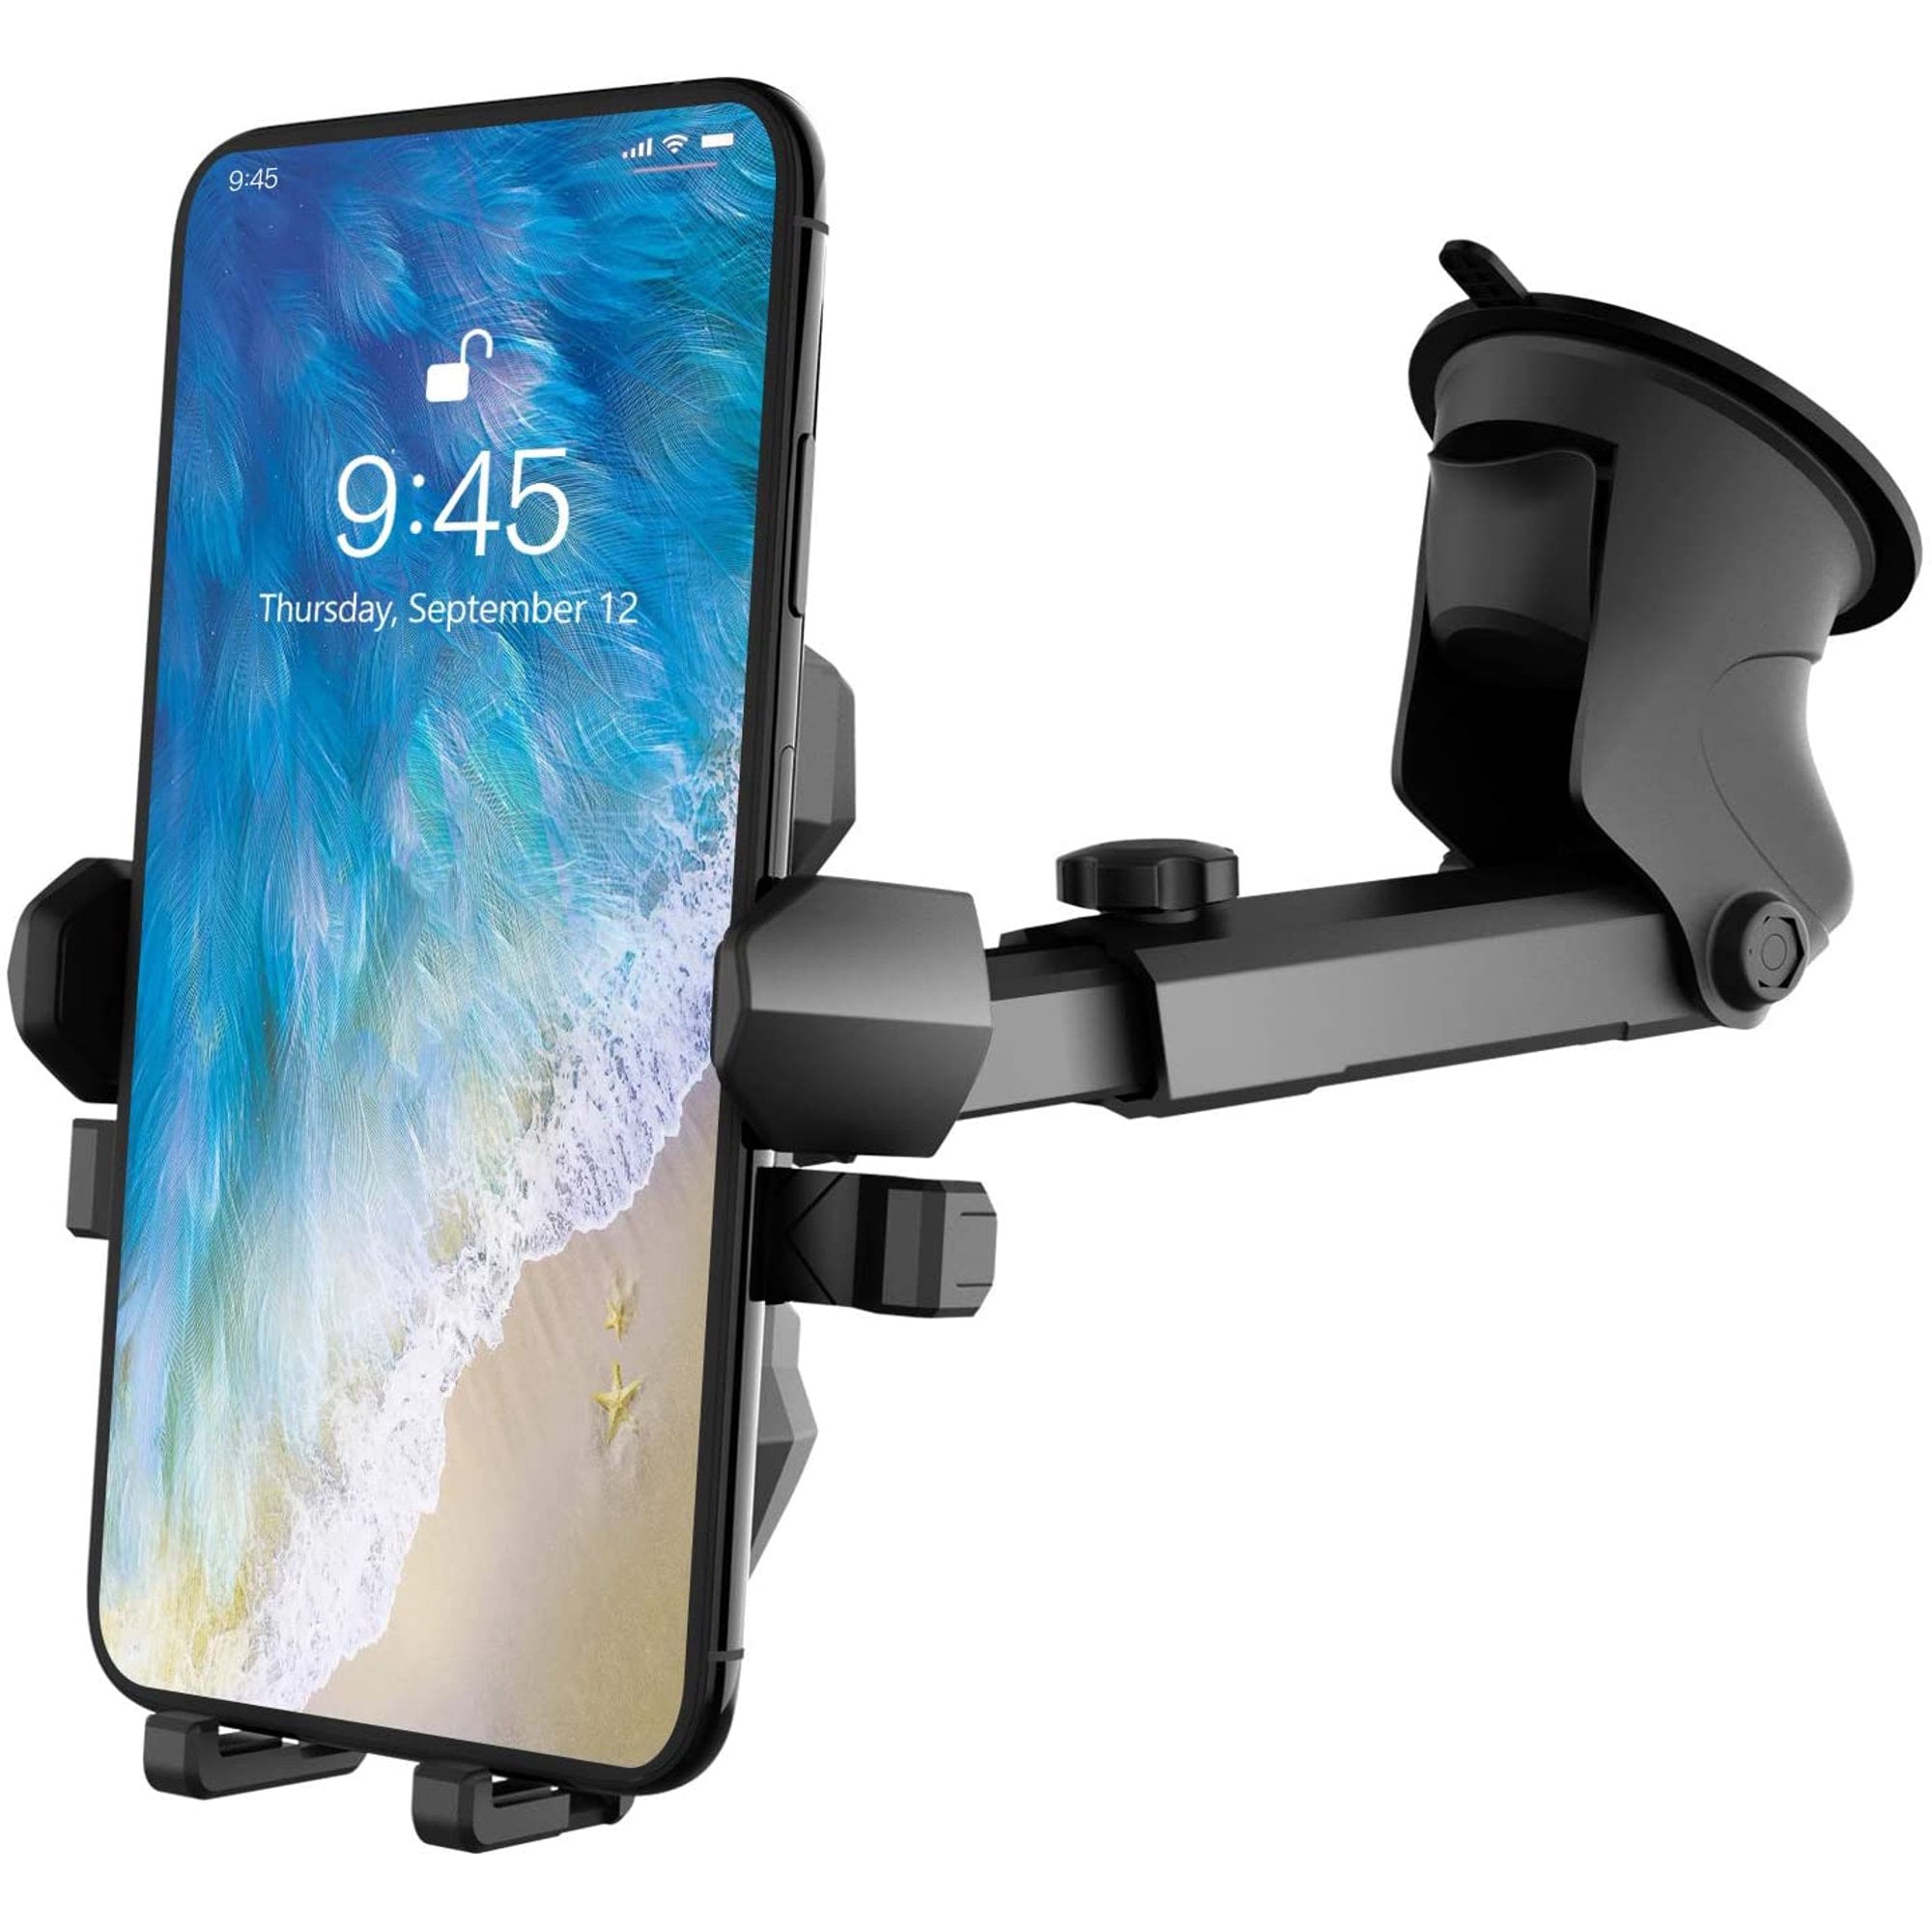 Universal Car Cell Phone Mount Holder 2 in 1 Windshield and Dashboard with Washable Strong Sticky Gel Pad for iPhone X R Xs Max 8 Plus 7 Samsung Galaxy S9 S8 Note 8 LG and Other Smart Phone 